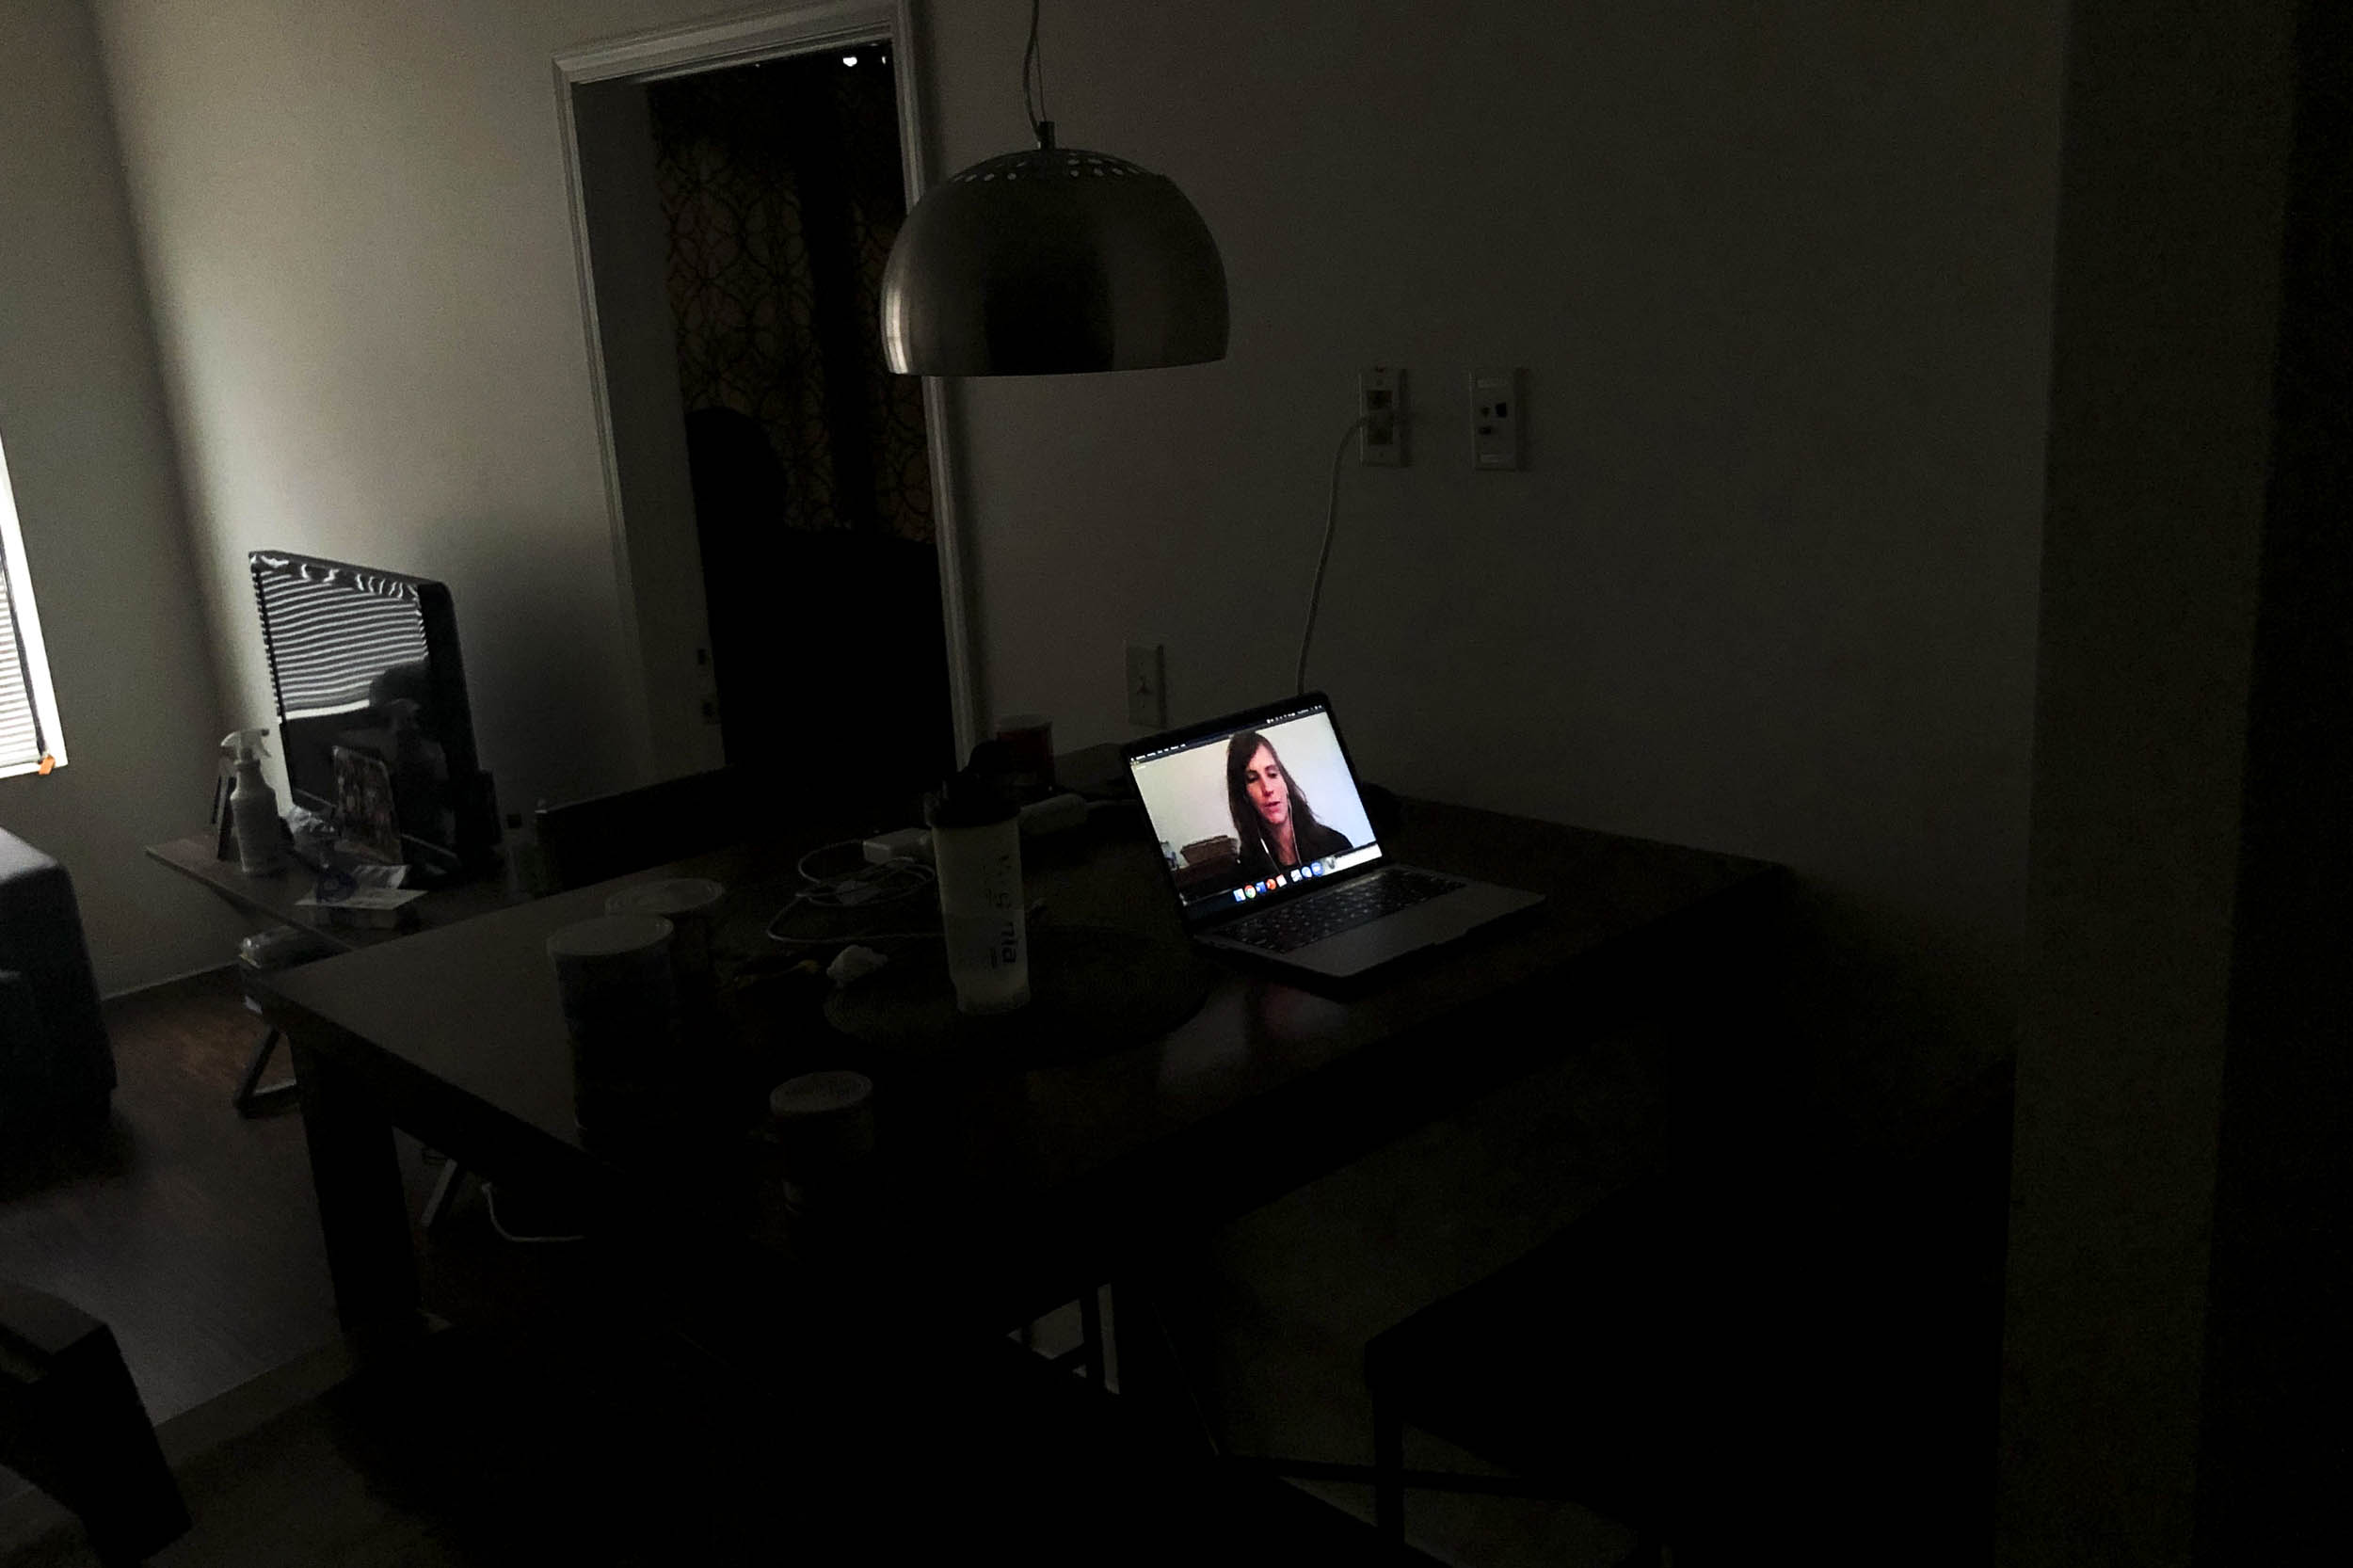 Dark room with a computer on with a womans face on the computer screen